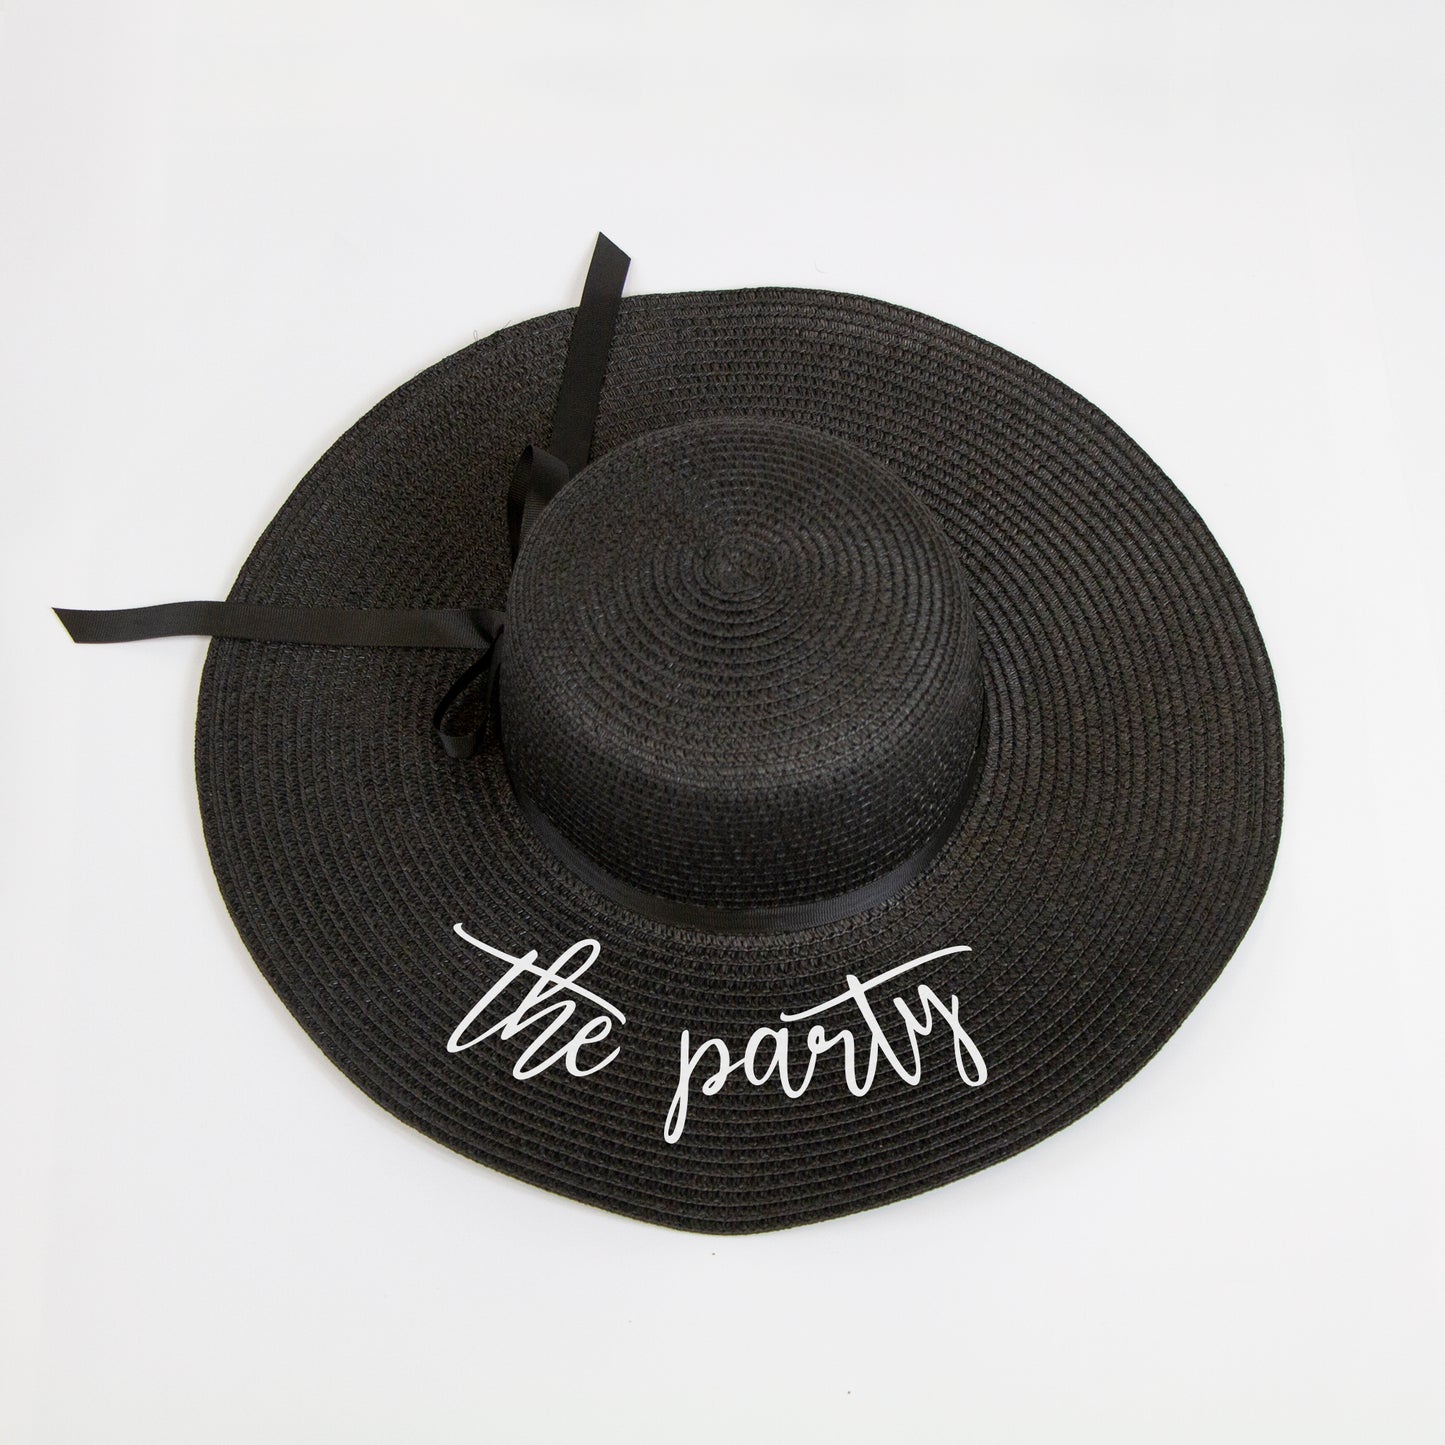 The Party, Wife of the Party Floppy Hats